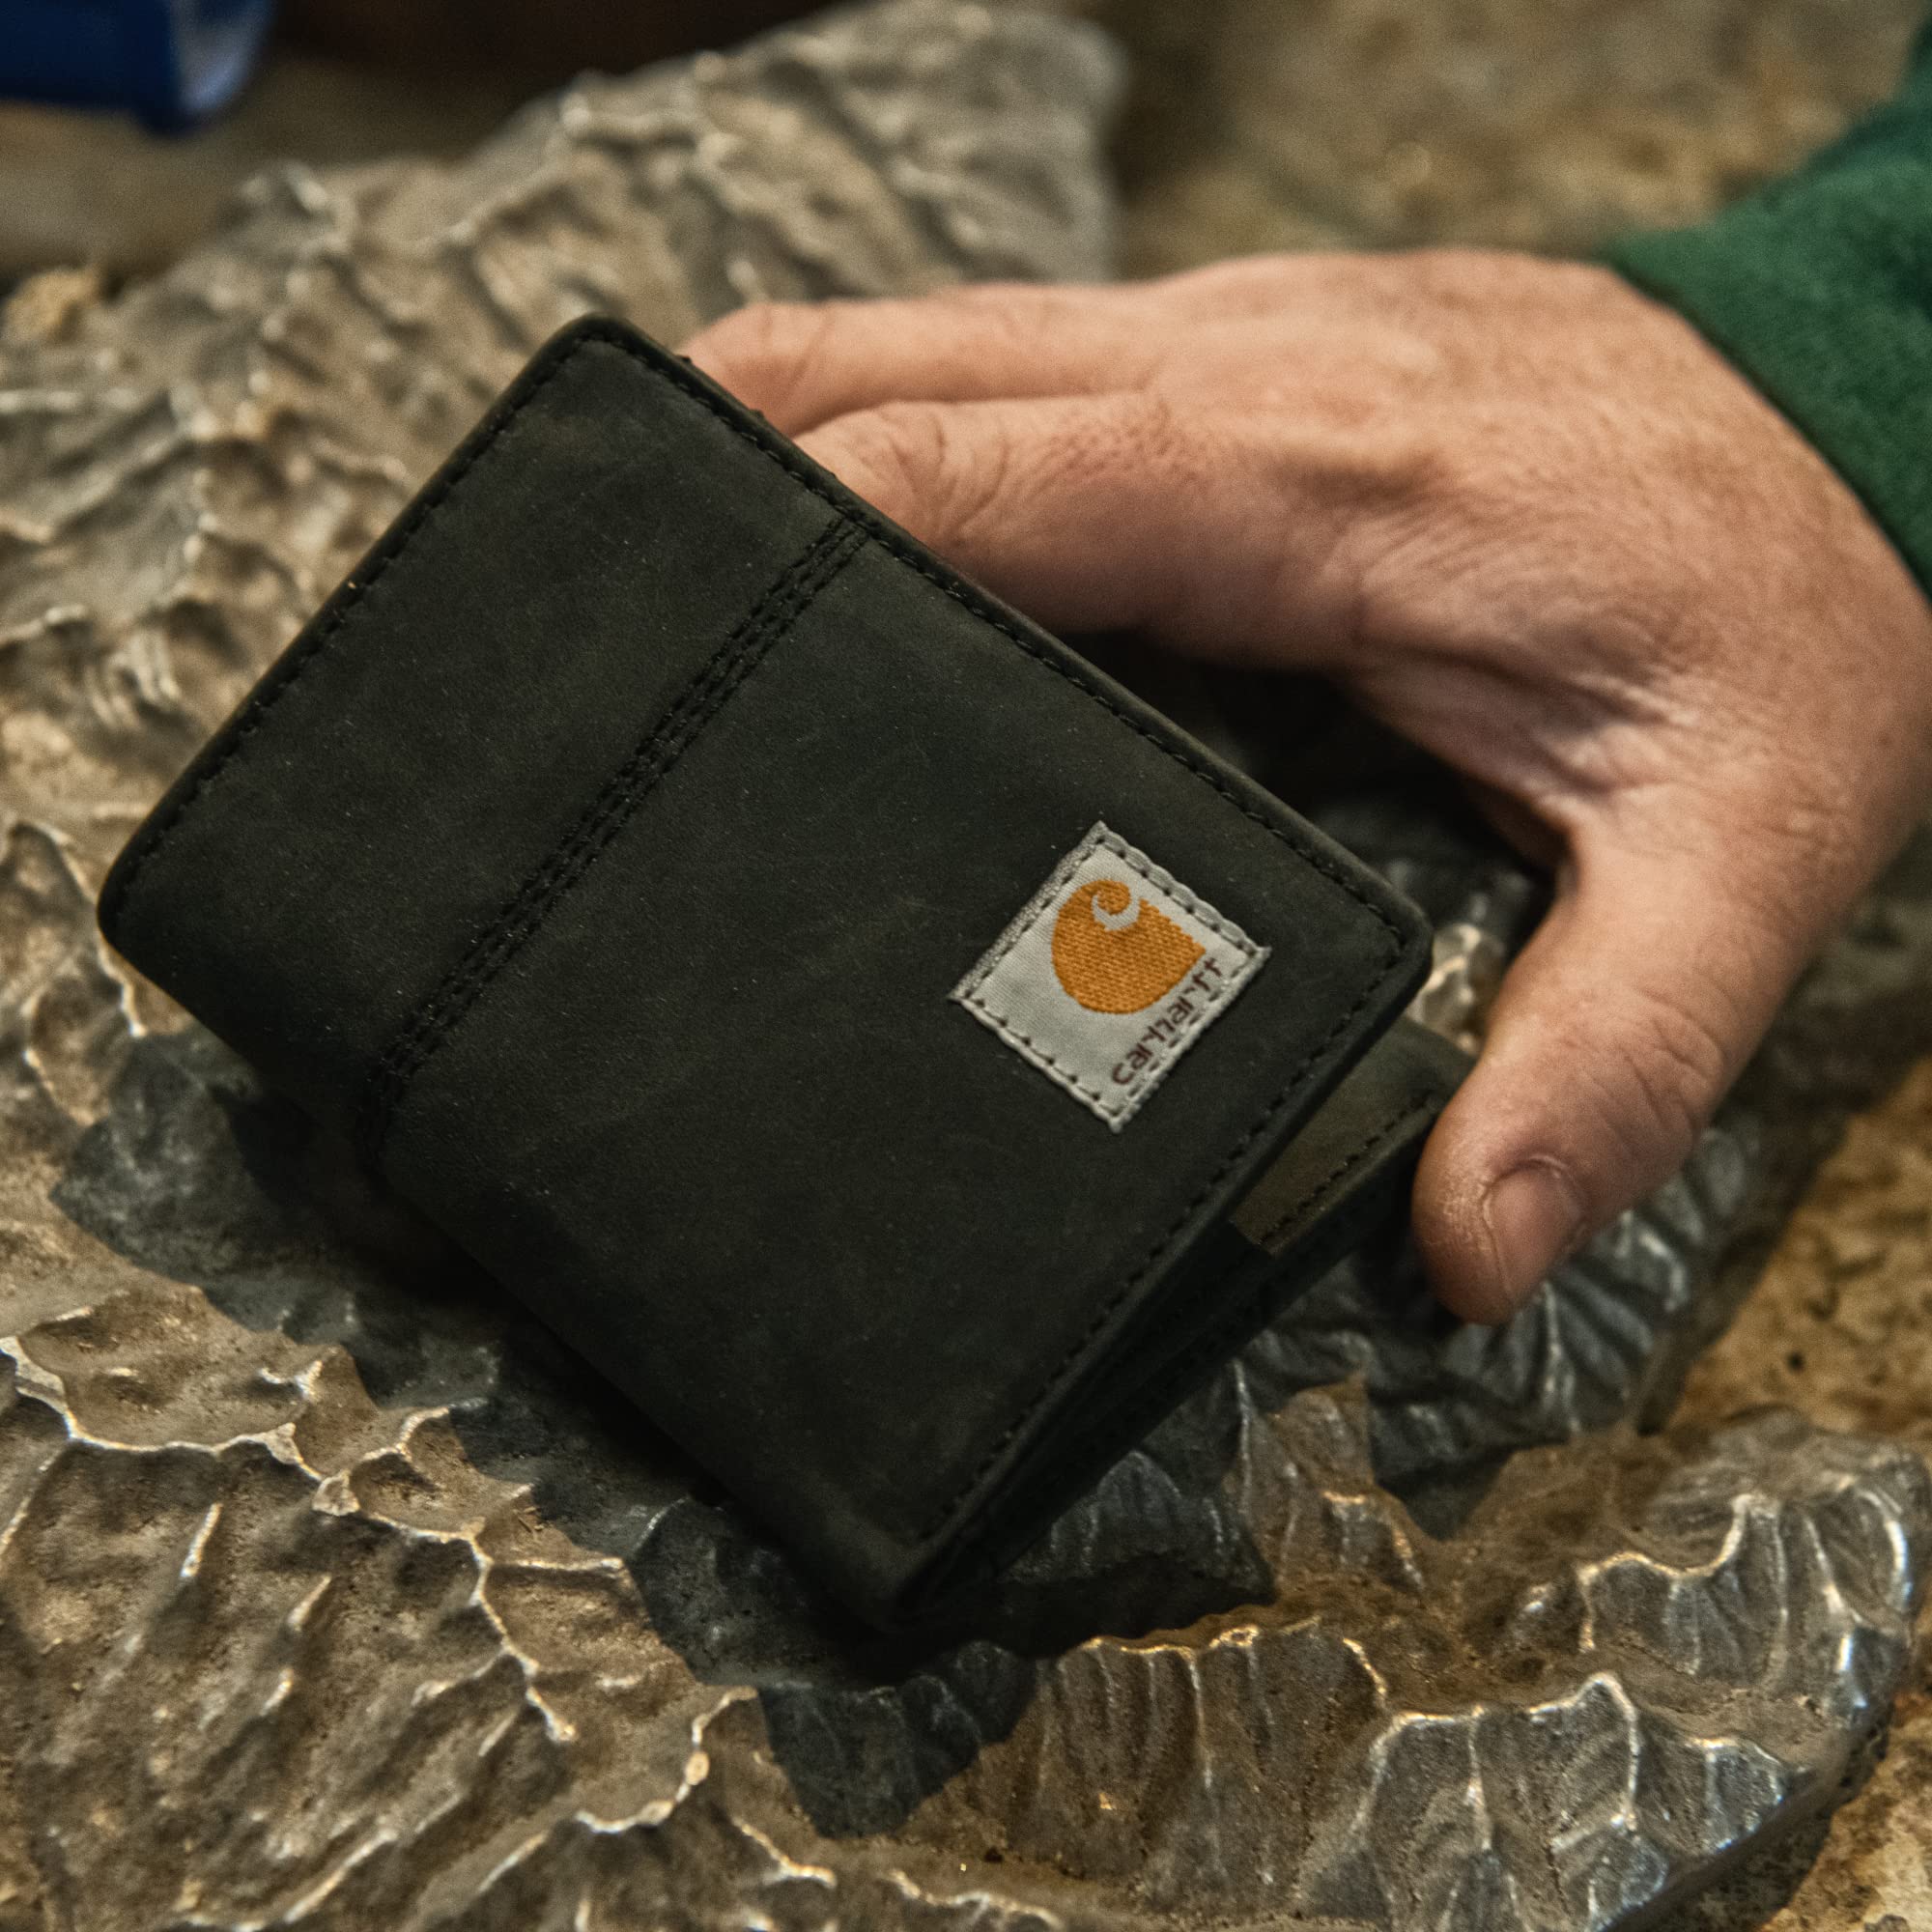 Carhartt Men's Trifold, Durable Wallets, Available in Leather and Canvas Styles